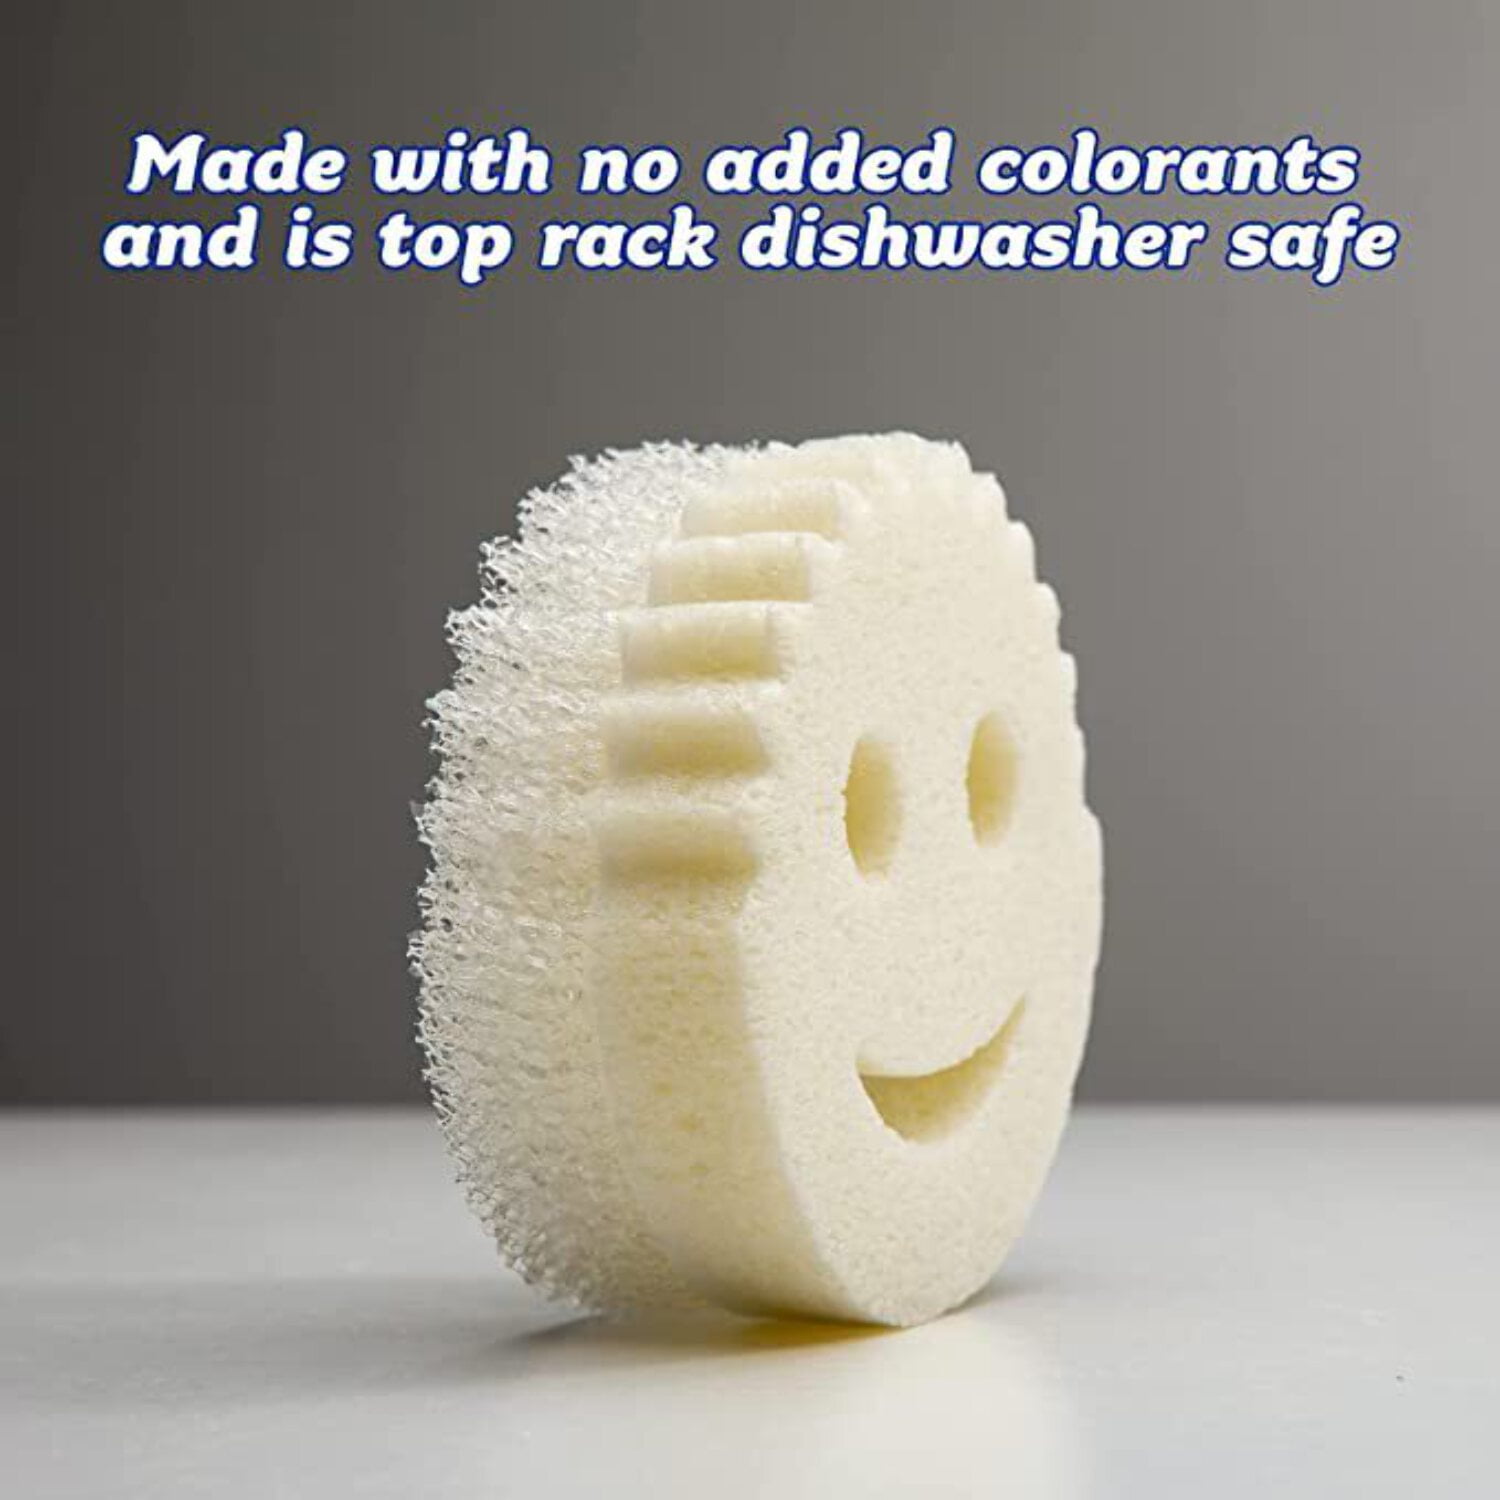 Scrub Daddy PowerPaste Natural Cleaning Compound  Urban Outfitters Mexico  - Clothing, Music, Home & Accessories